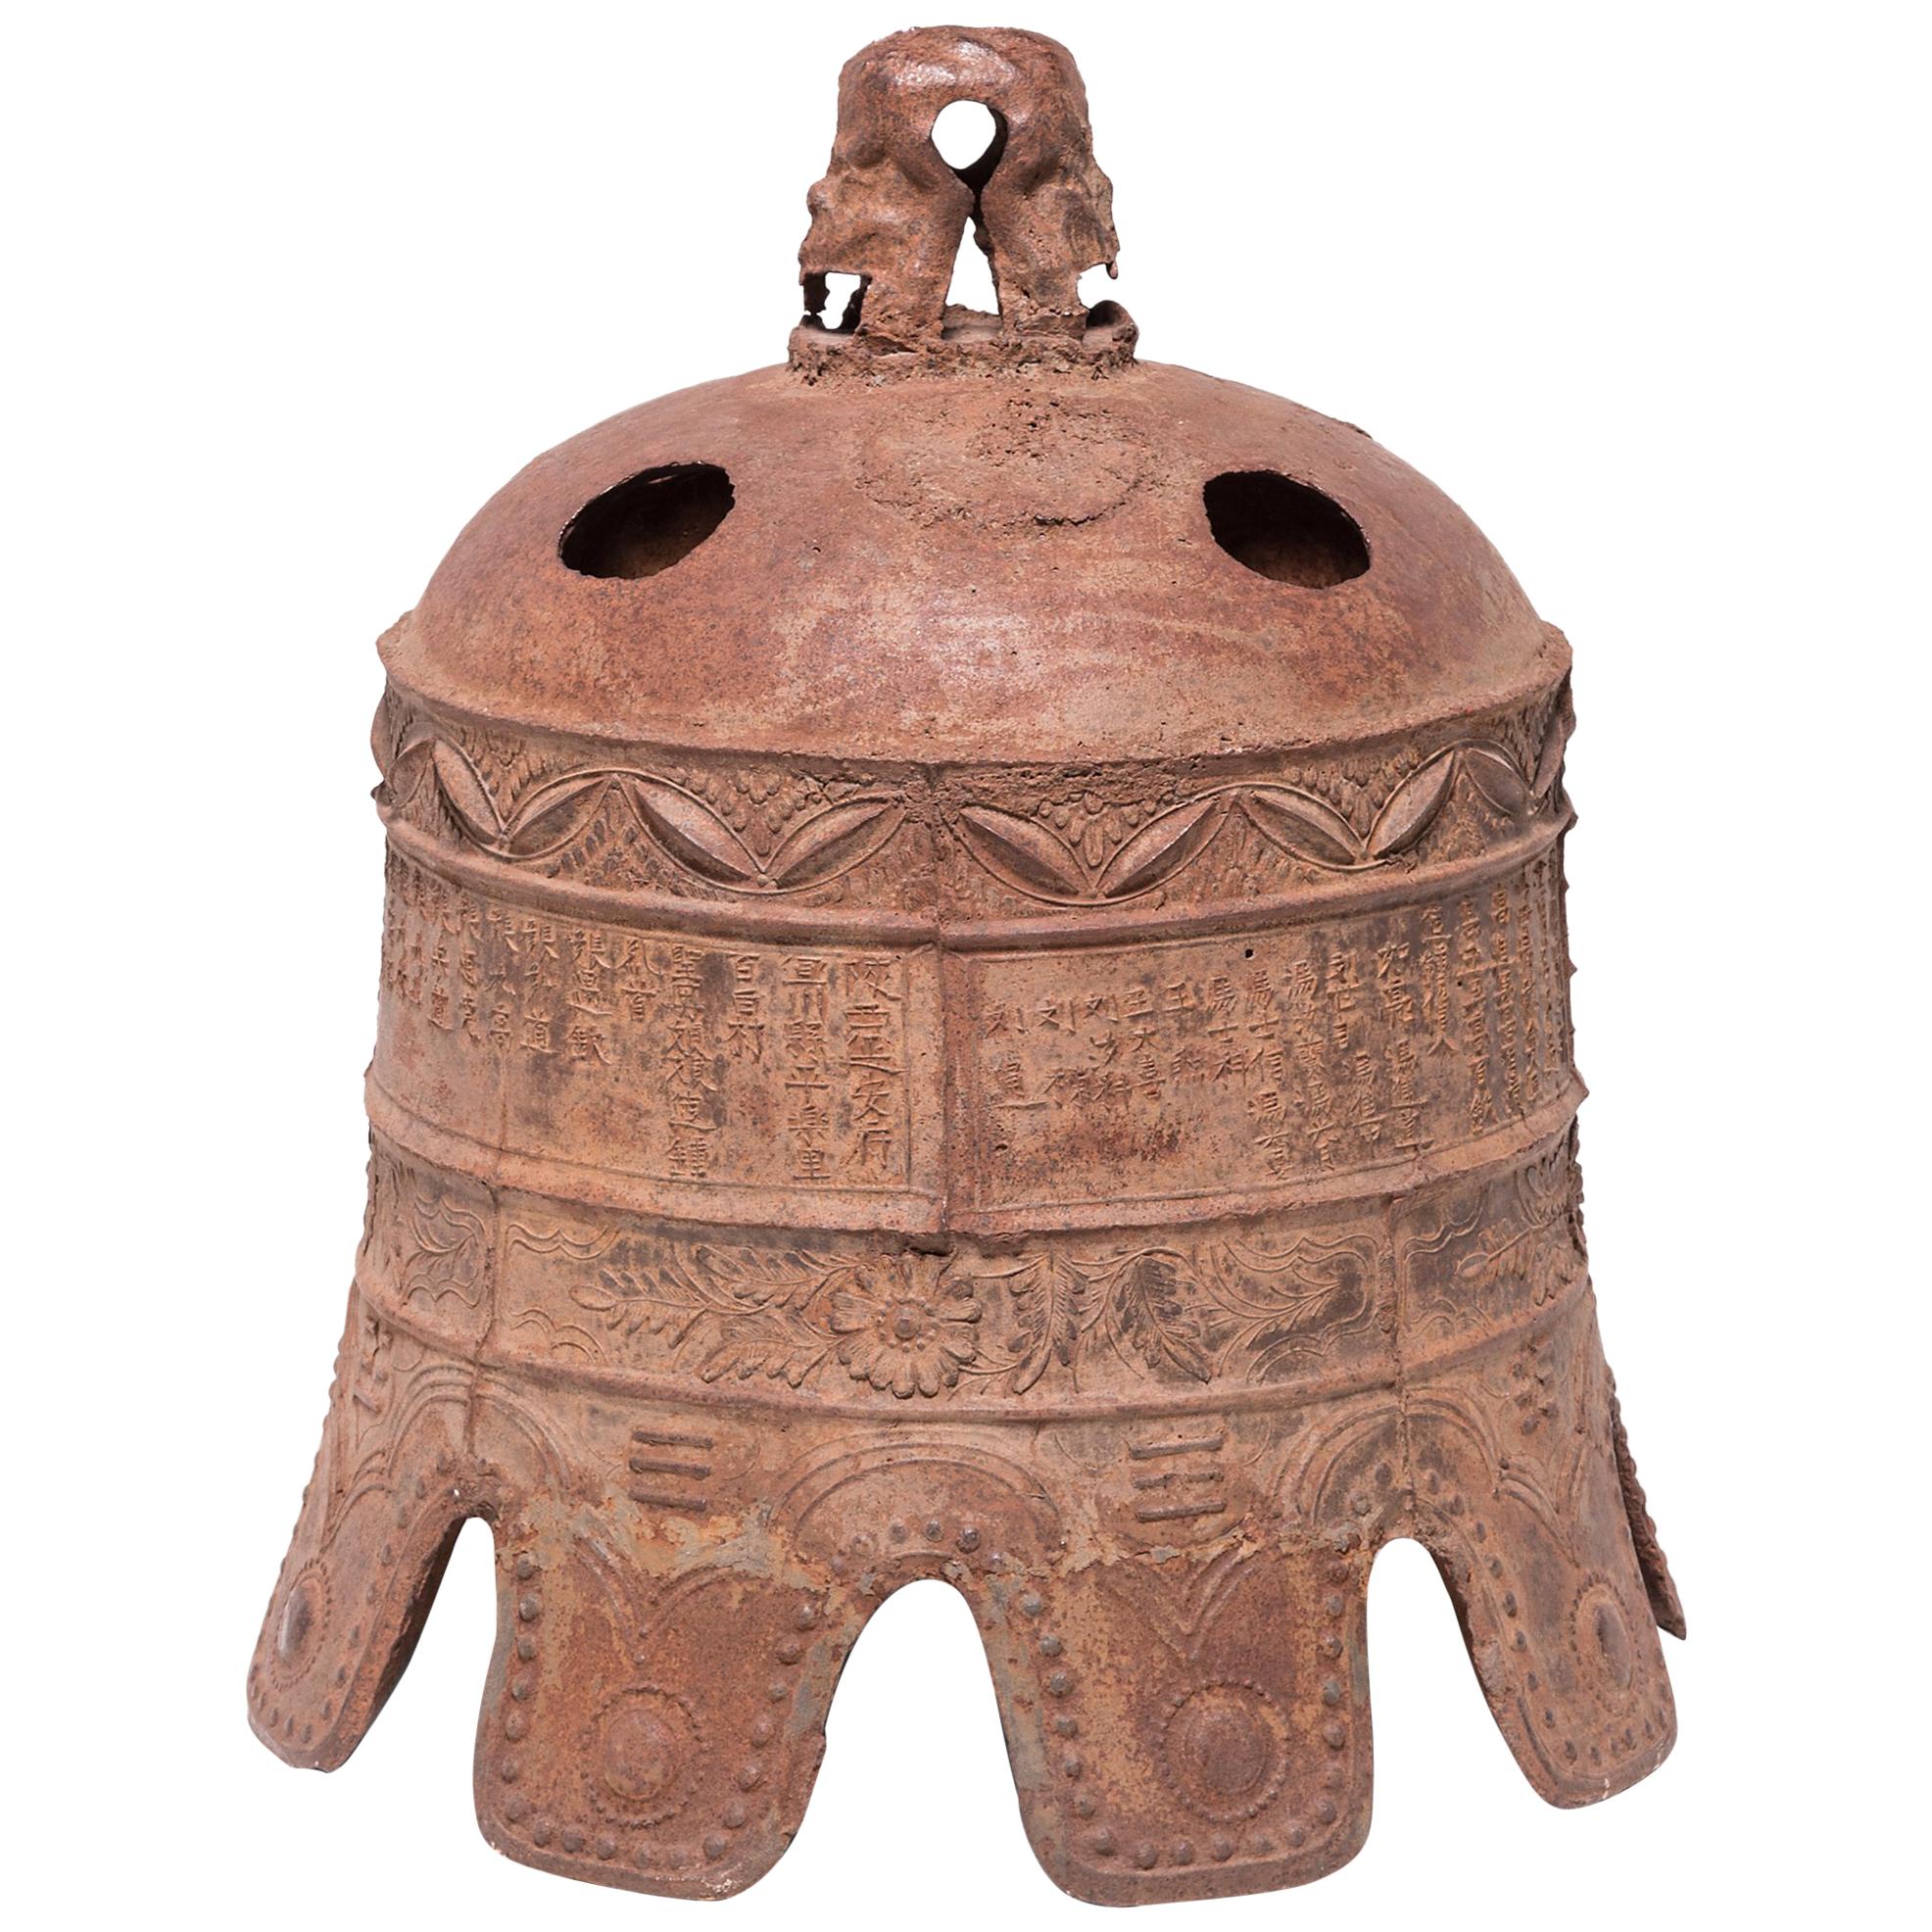 Chinese Wanli-Era Cast Iron Bell For Sale